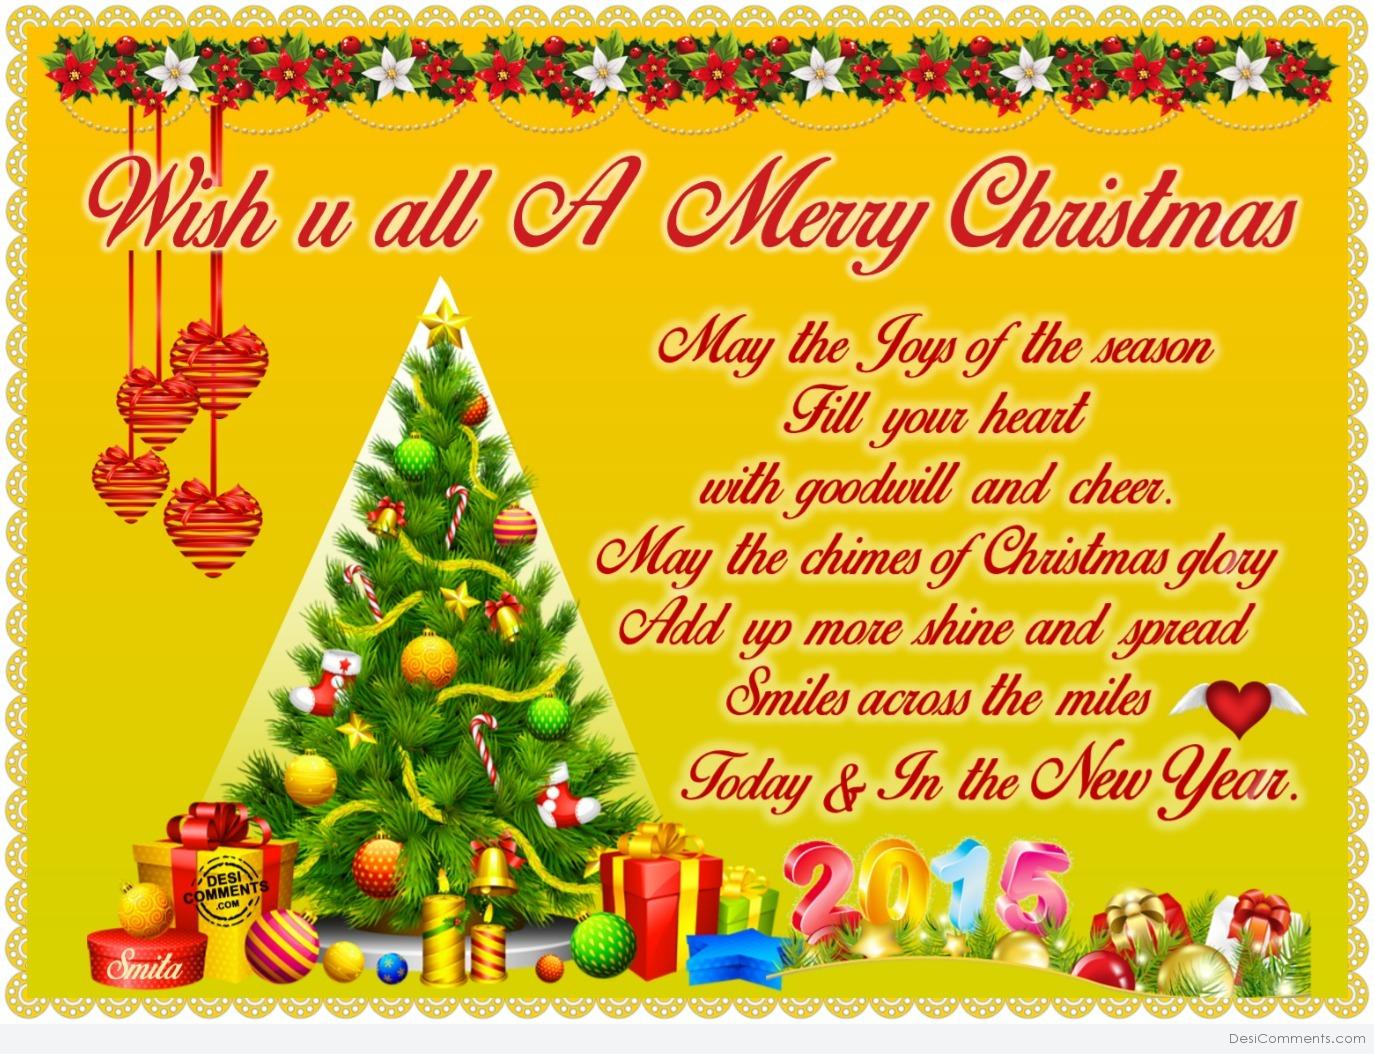 Christmas And New Year Wishes